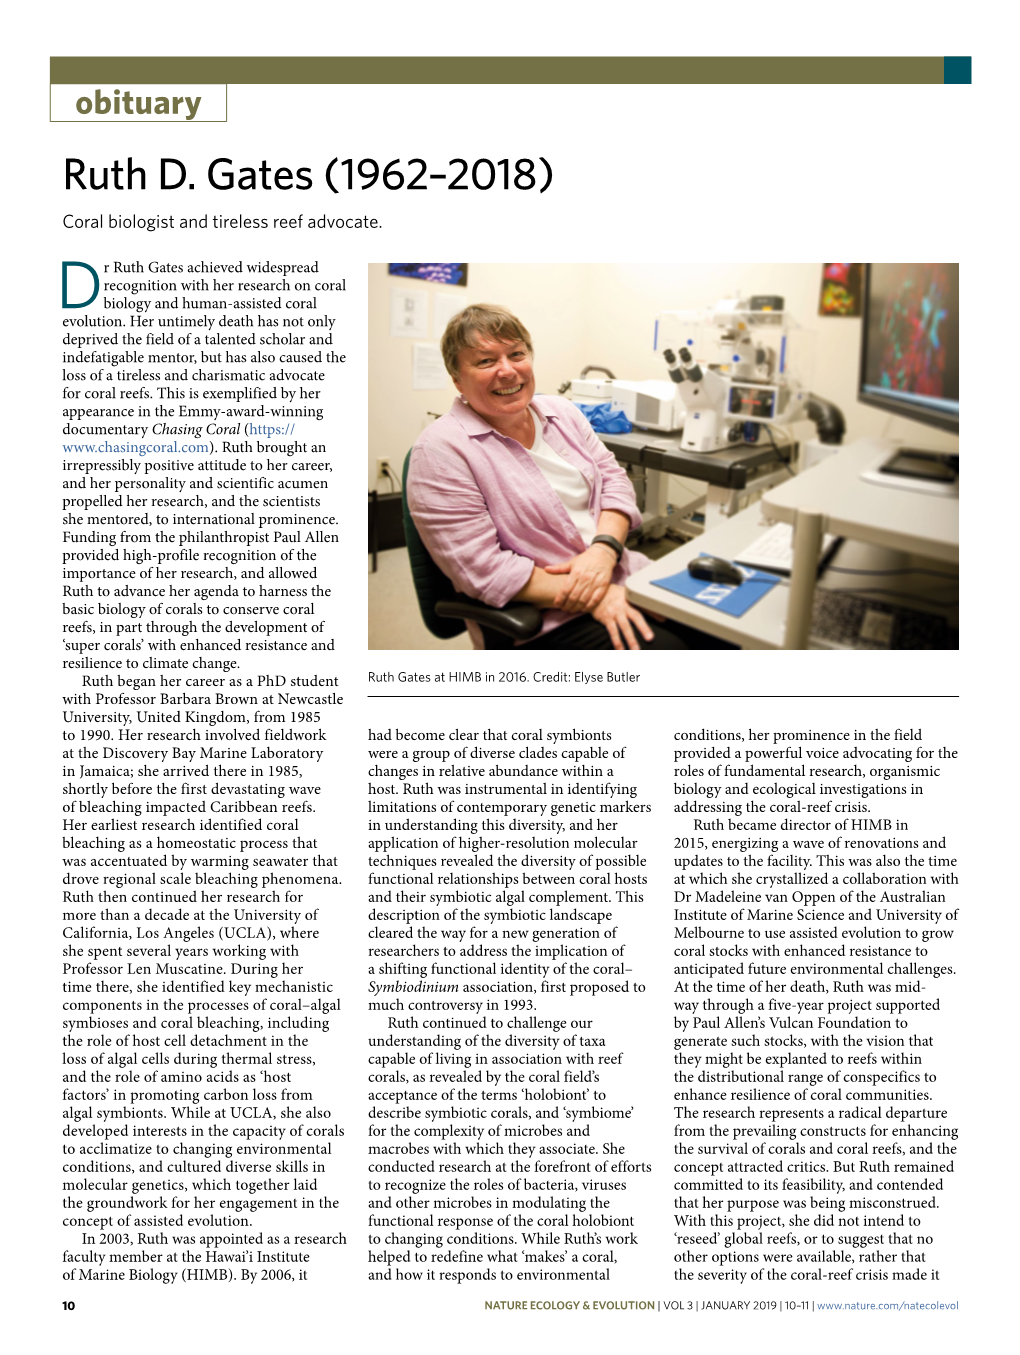 Ruth D. Gates (1962–2018) Coral Biologist and Tireless Reef Advocate